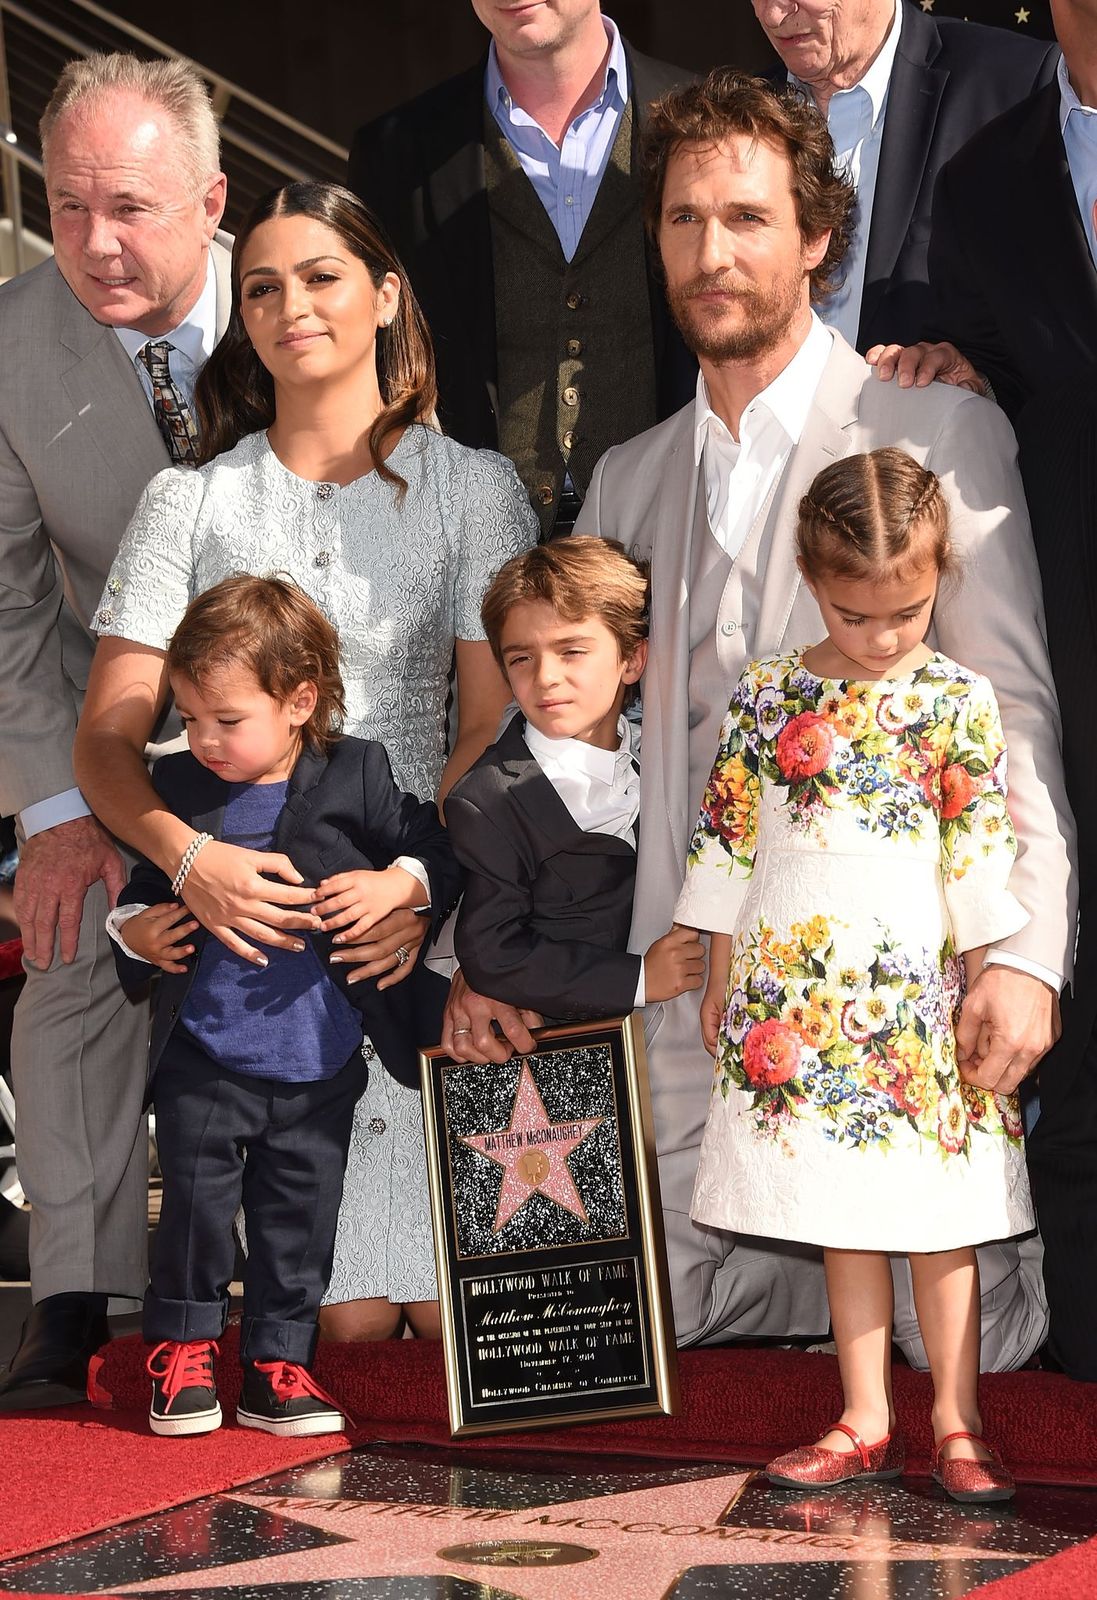 Matthew McConaughey, his wife Camila Alves, and their children Levi, Livingston, and Vida at The Hollywood Walk Of Fame ceremony for Matthew on November 17, 2014, in California | Photo: Jason Merritt/Getty Images